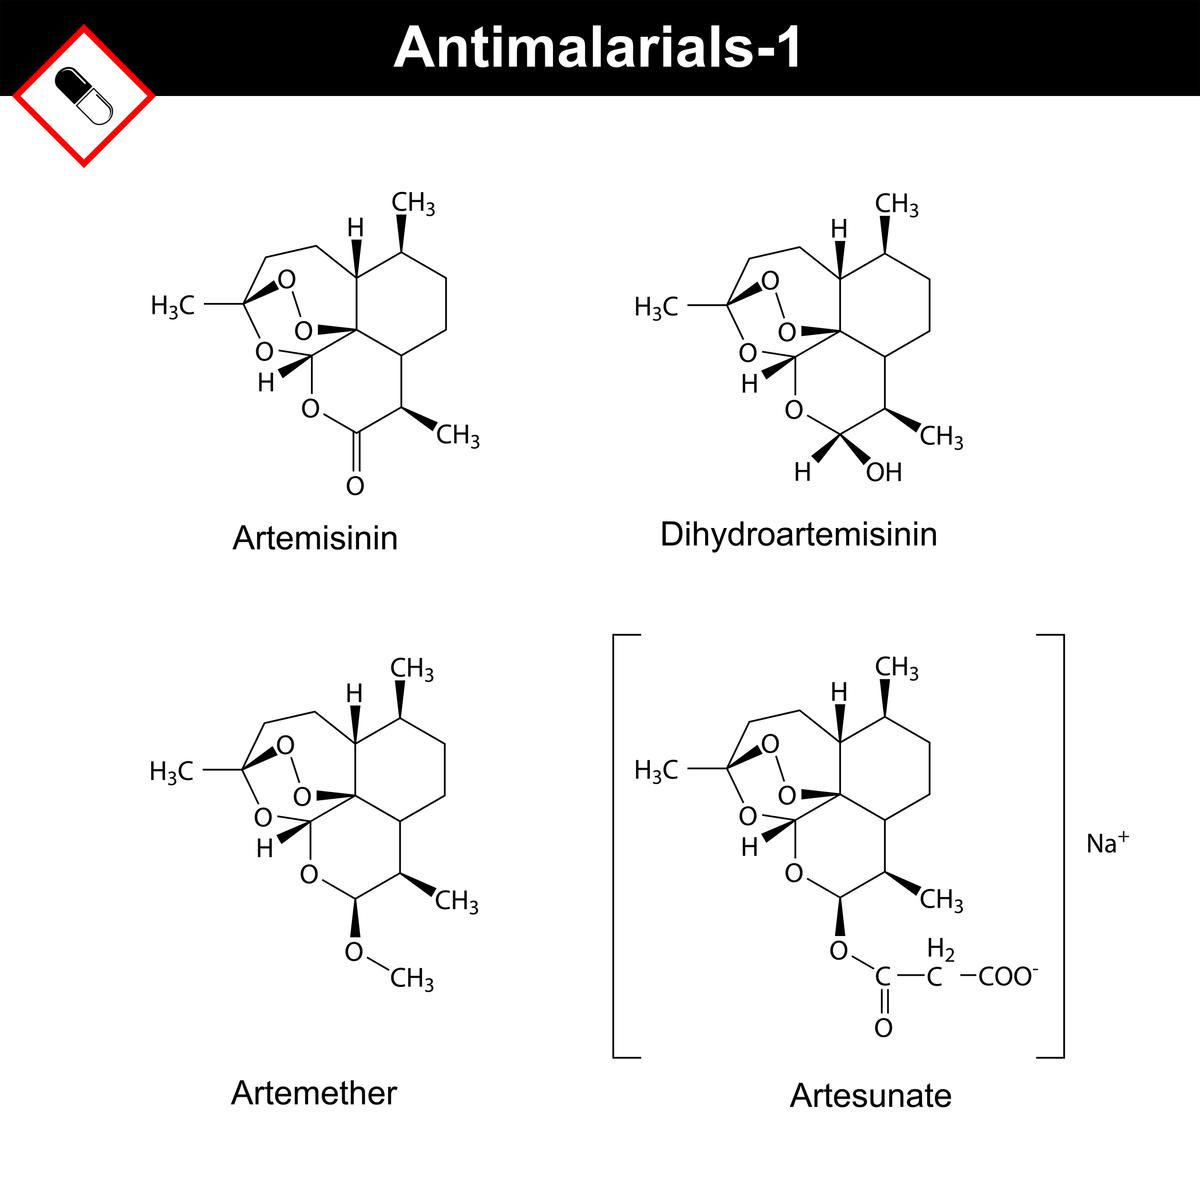 Chemical structures of artemisinin and its derivatives. (Shutterstock)